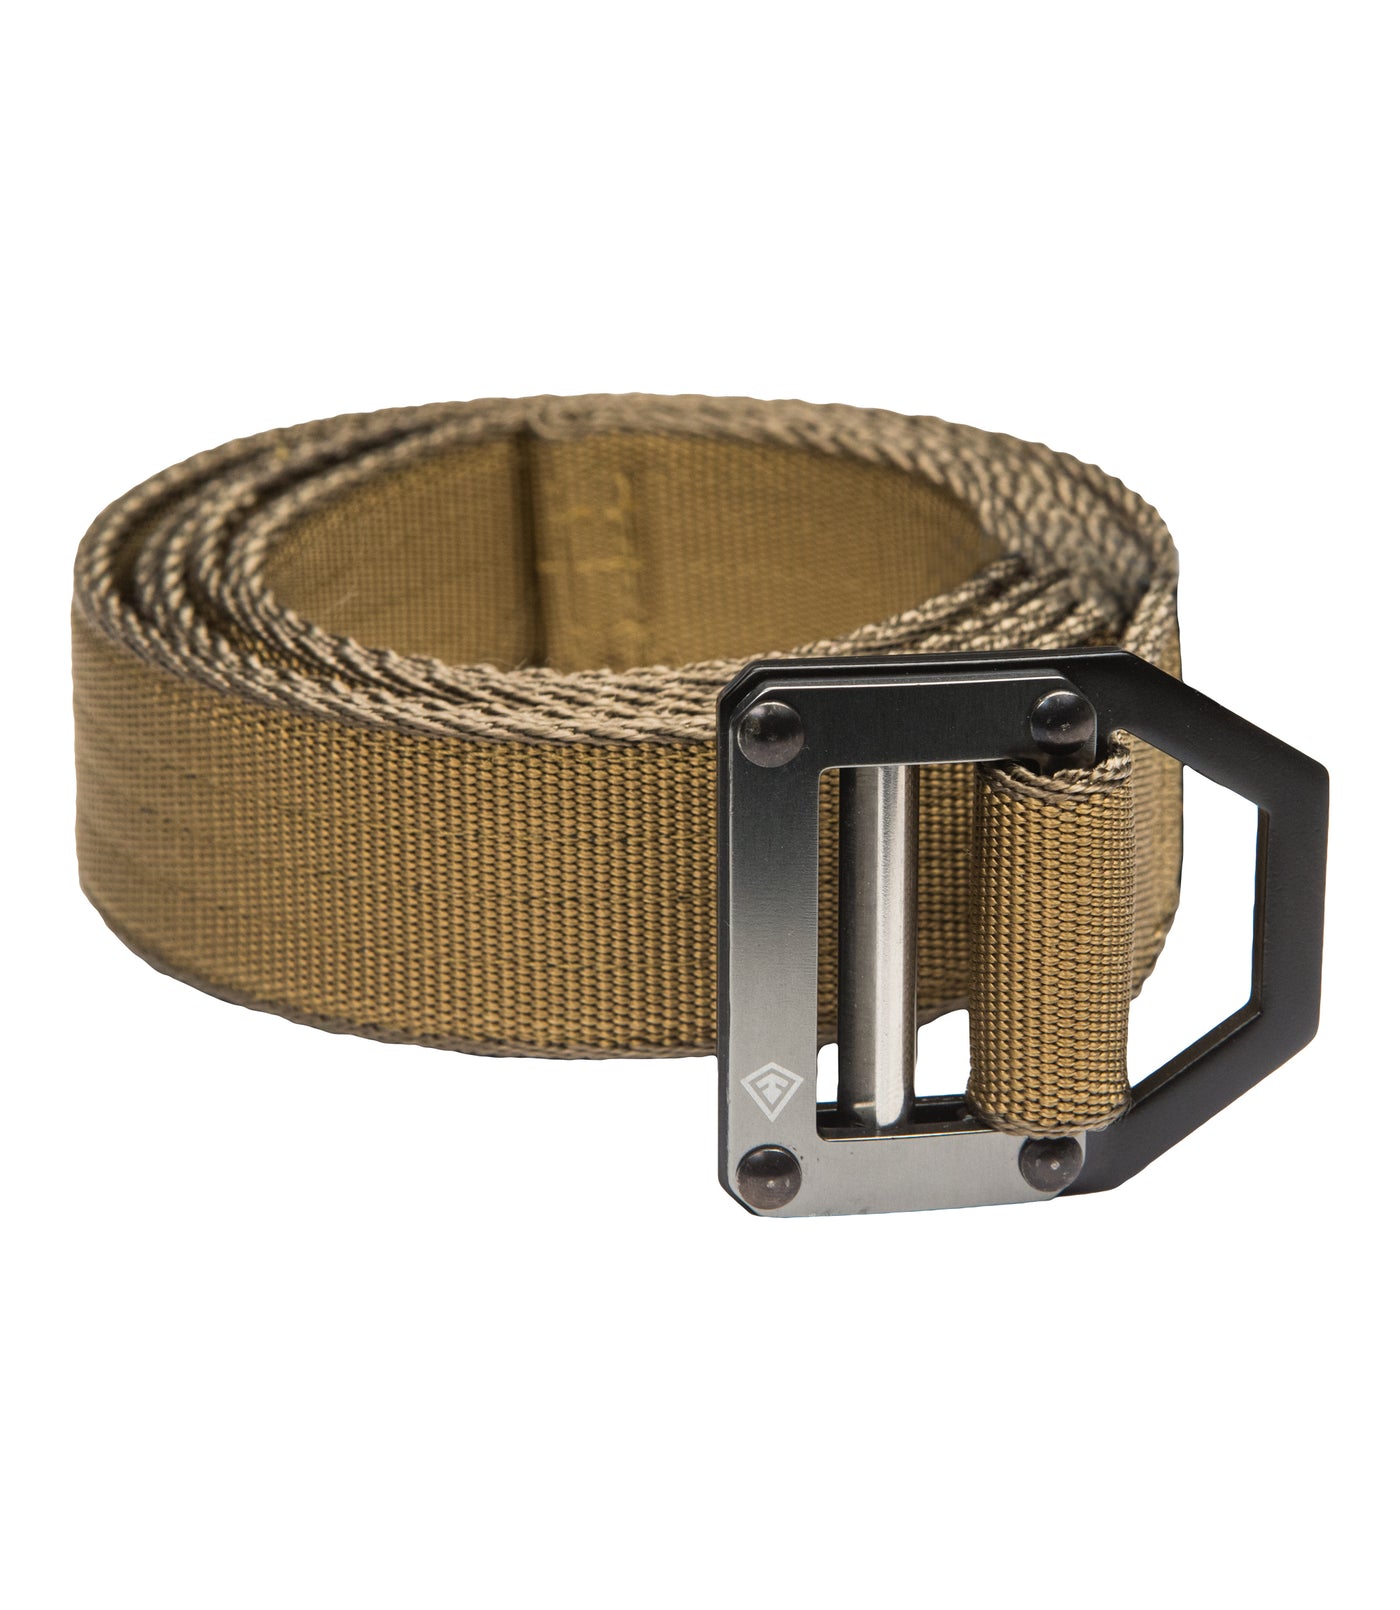 Buckle for Tactical Belt 1.5” in Coyote